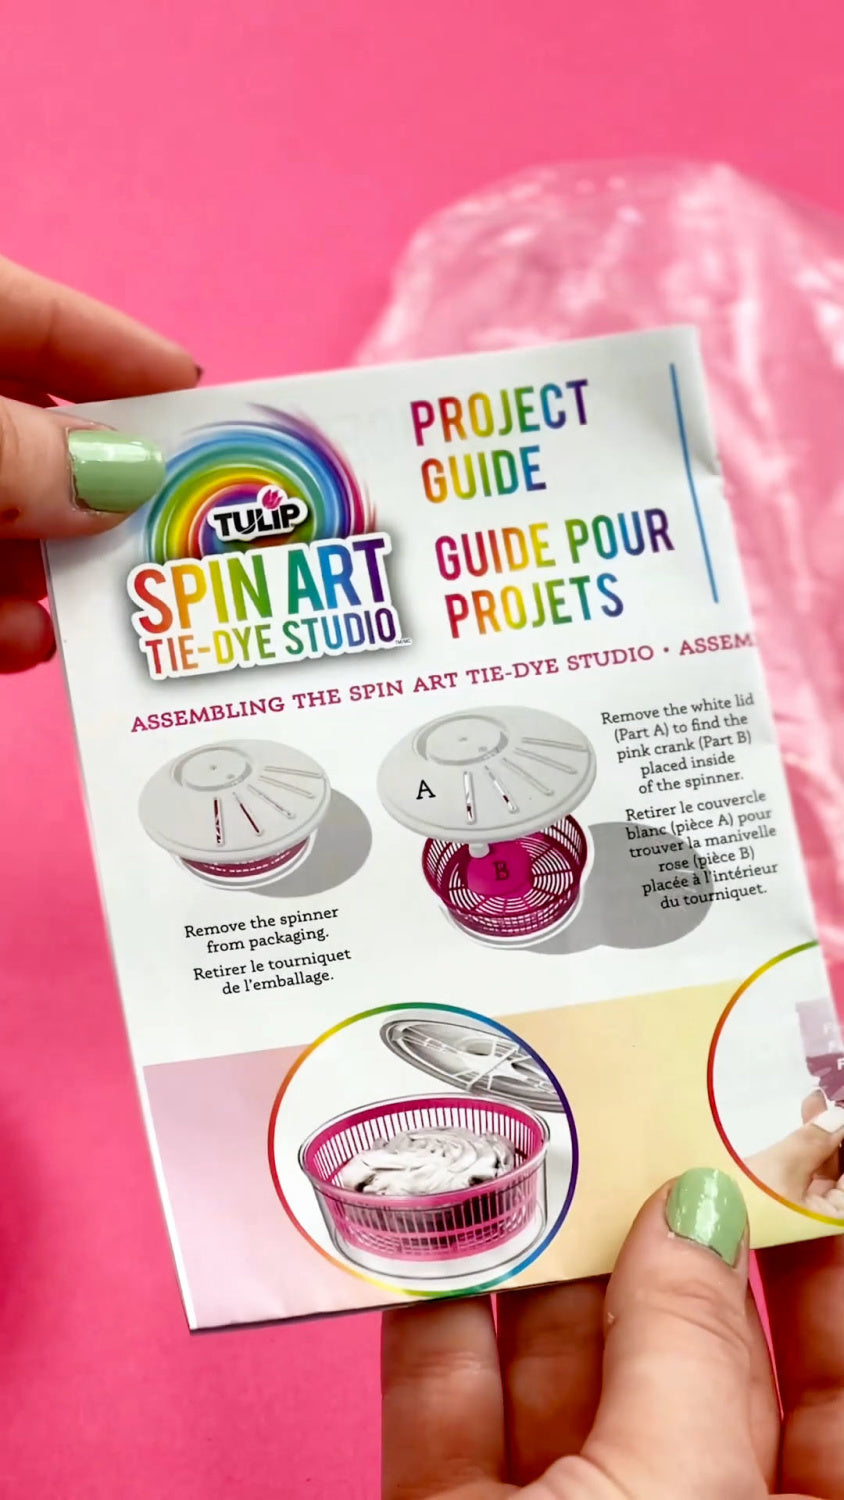 Prepare your spin art tie-dye station